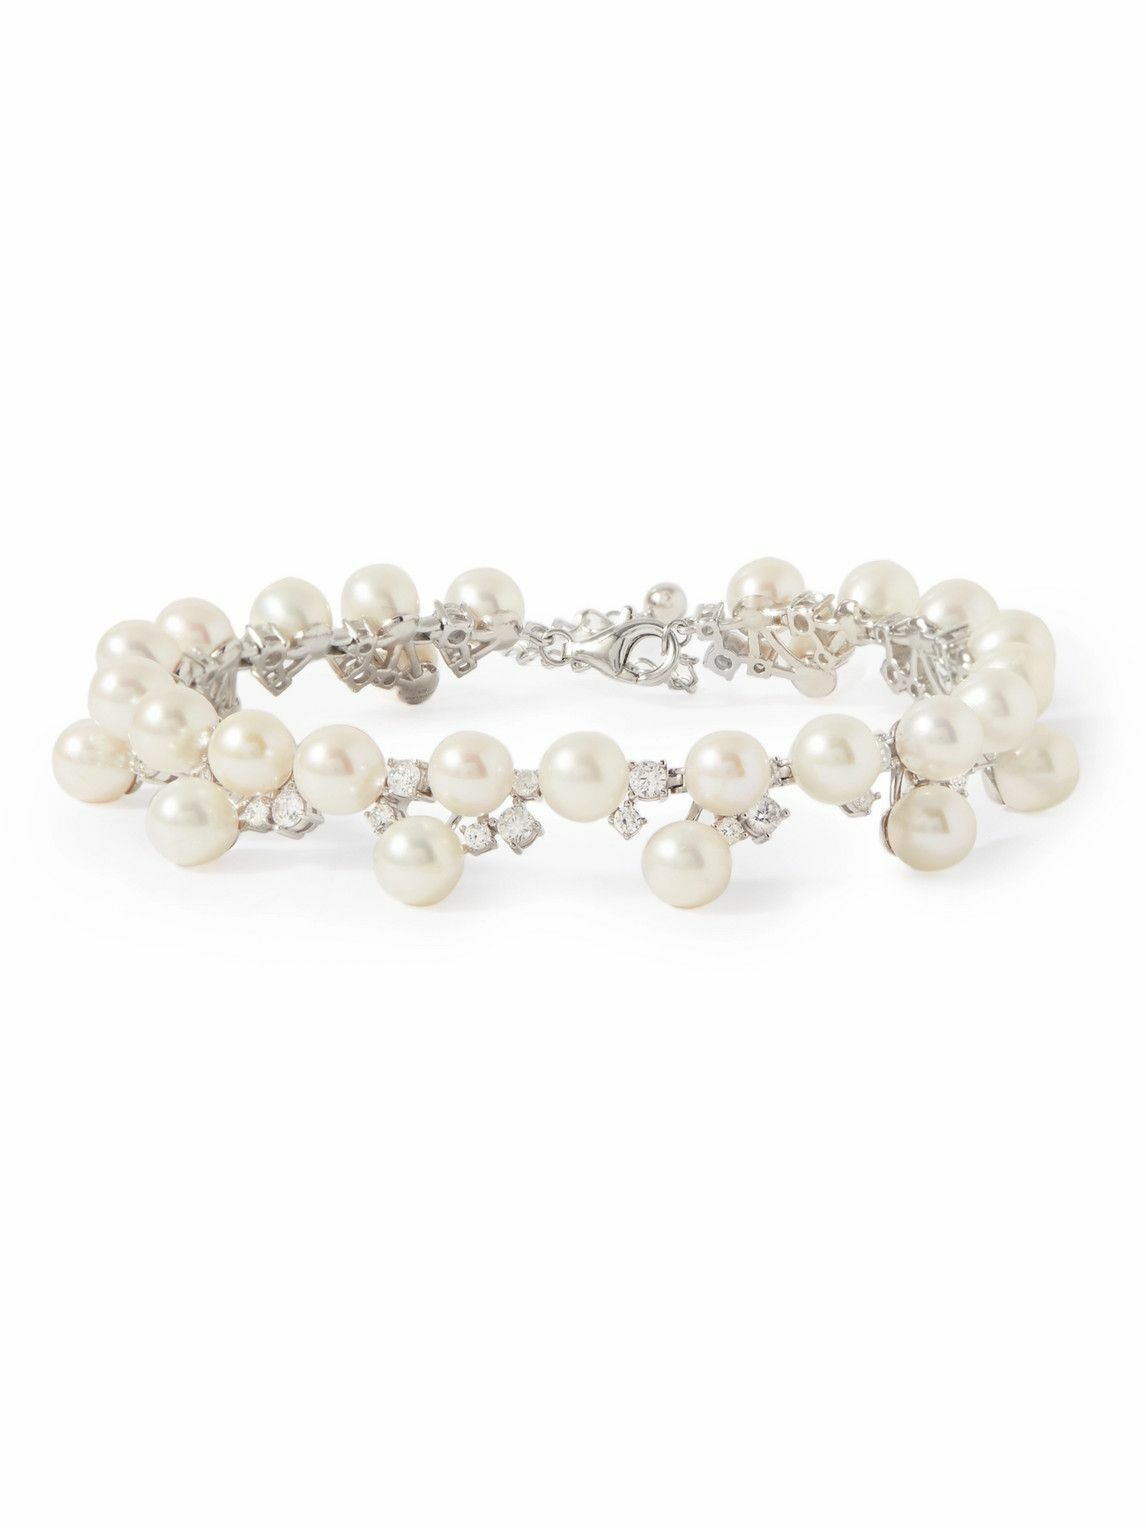 Photo: Hatton Labs - Silver, Pearl and Cubic Zirconia Tennis Bracelet - White